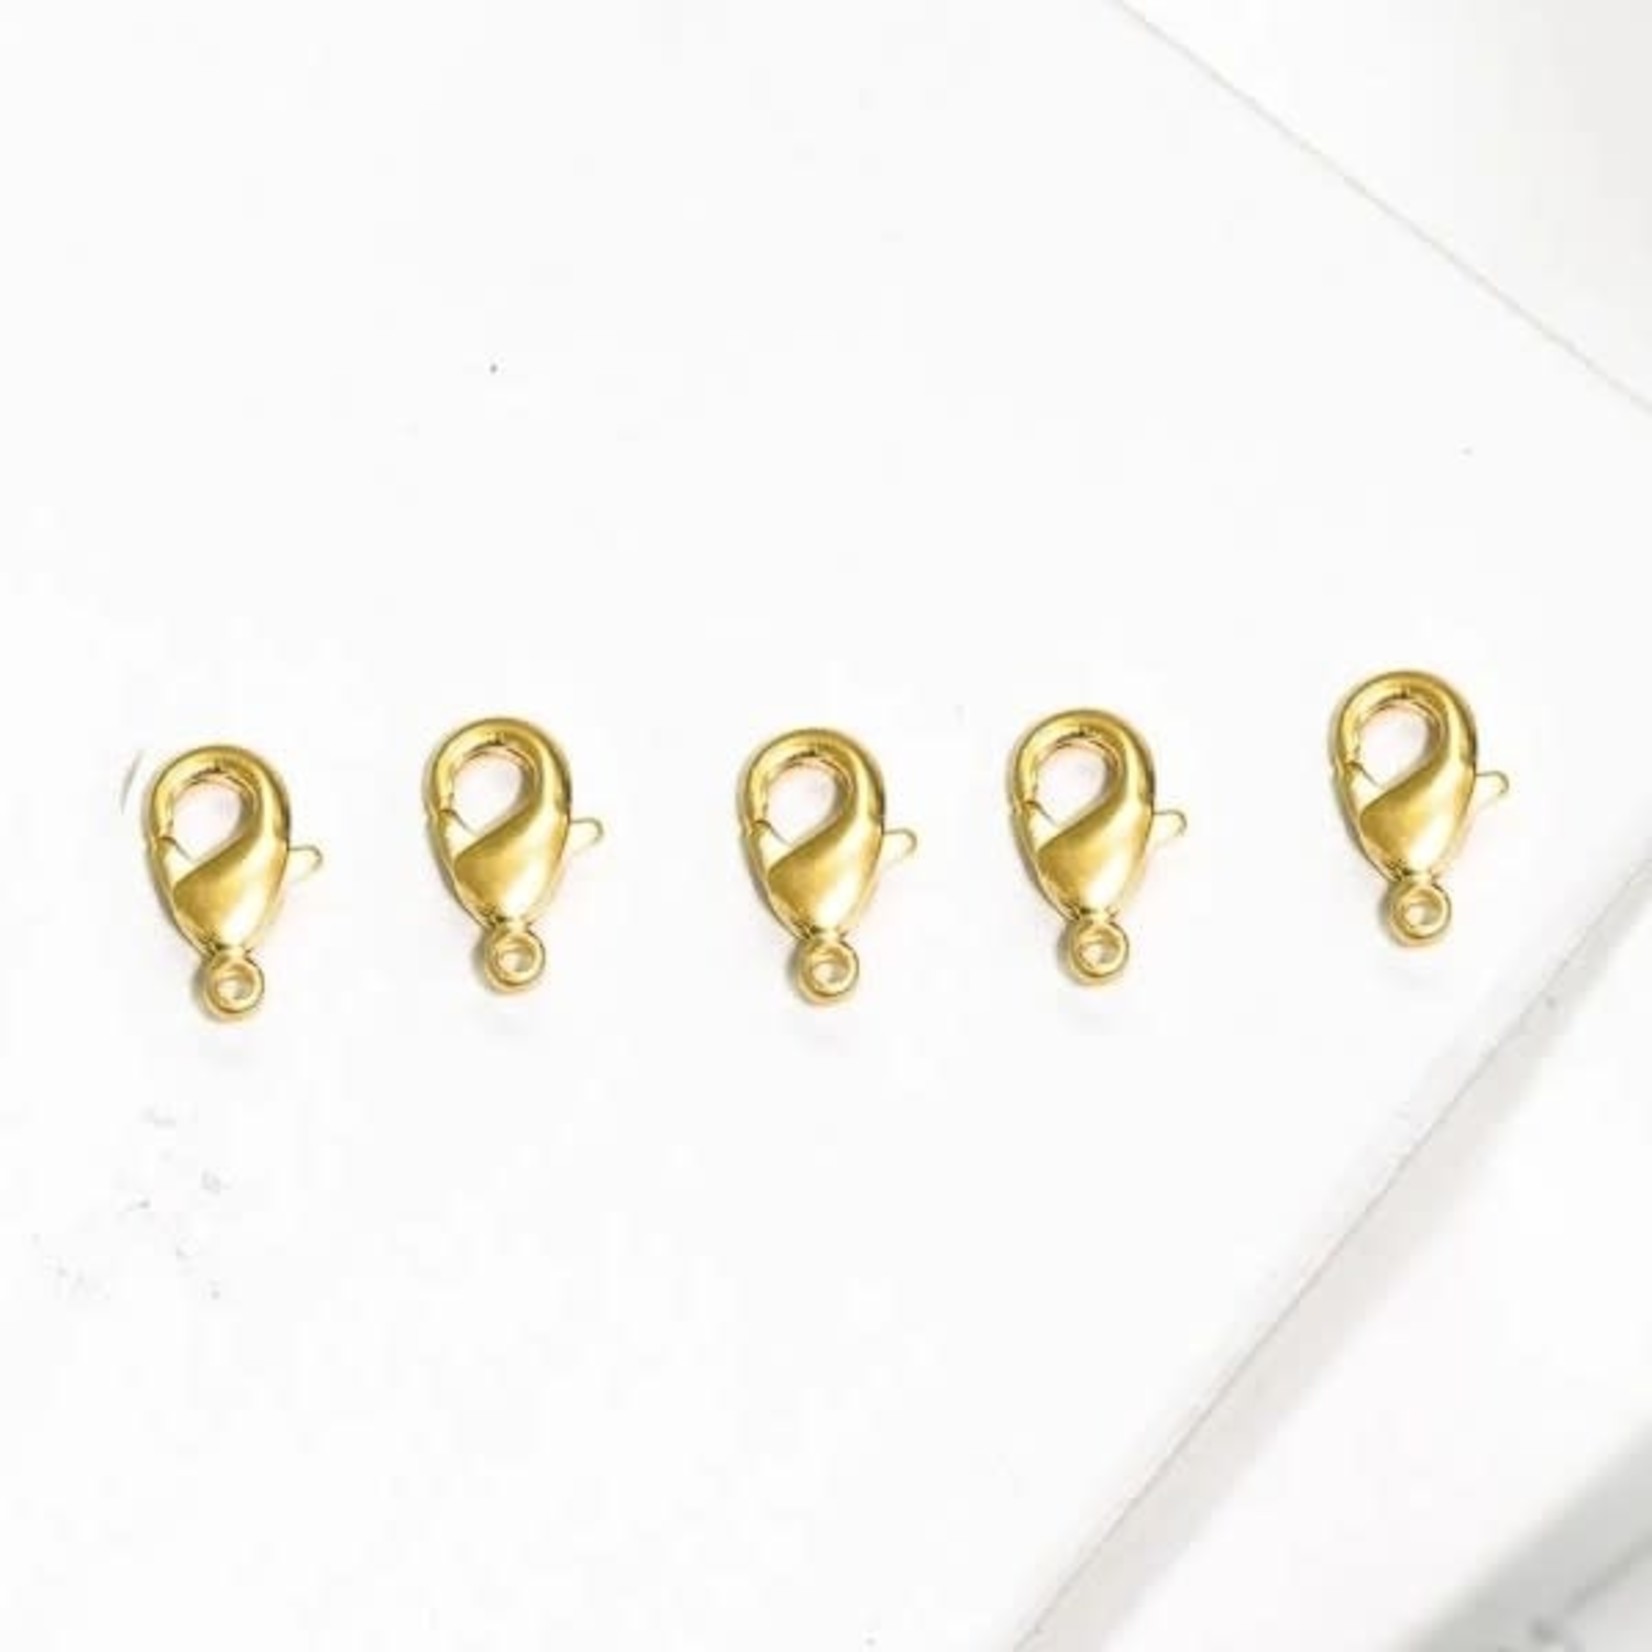 Satin Gold Plated Lobster Clasp  9x5mm Nickel-Free - 5 pieces